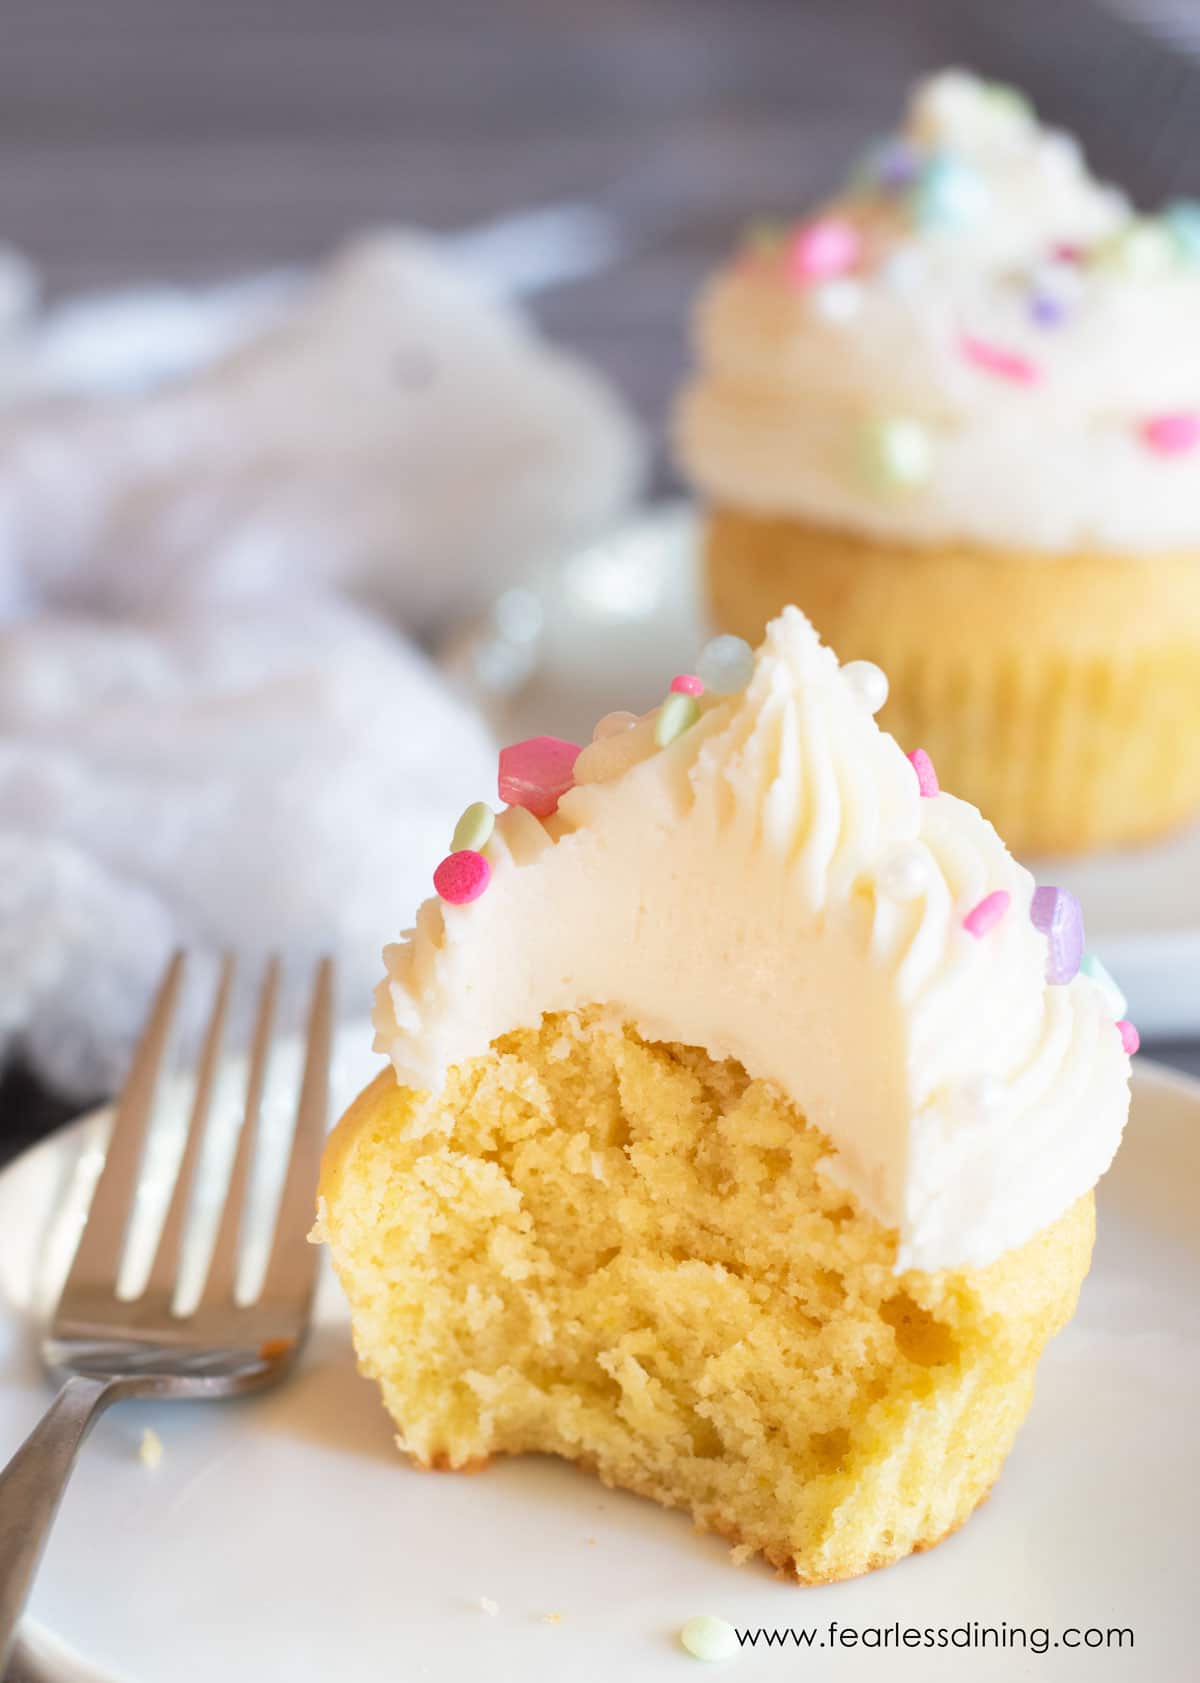 A frosted gluten free vanilla cupcake with a bite taken out.